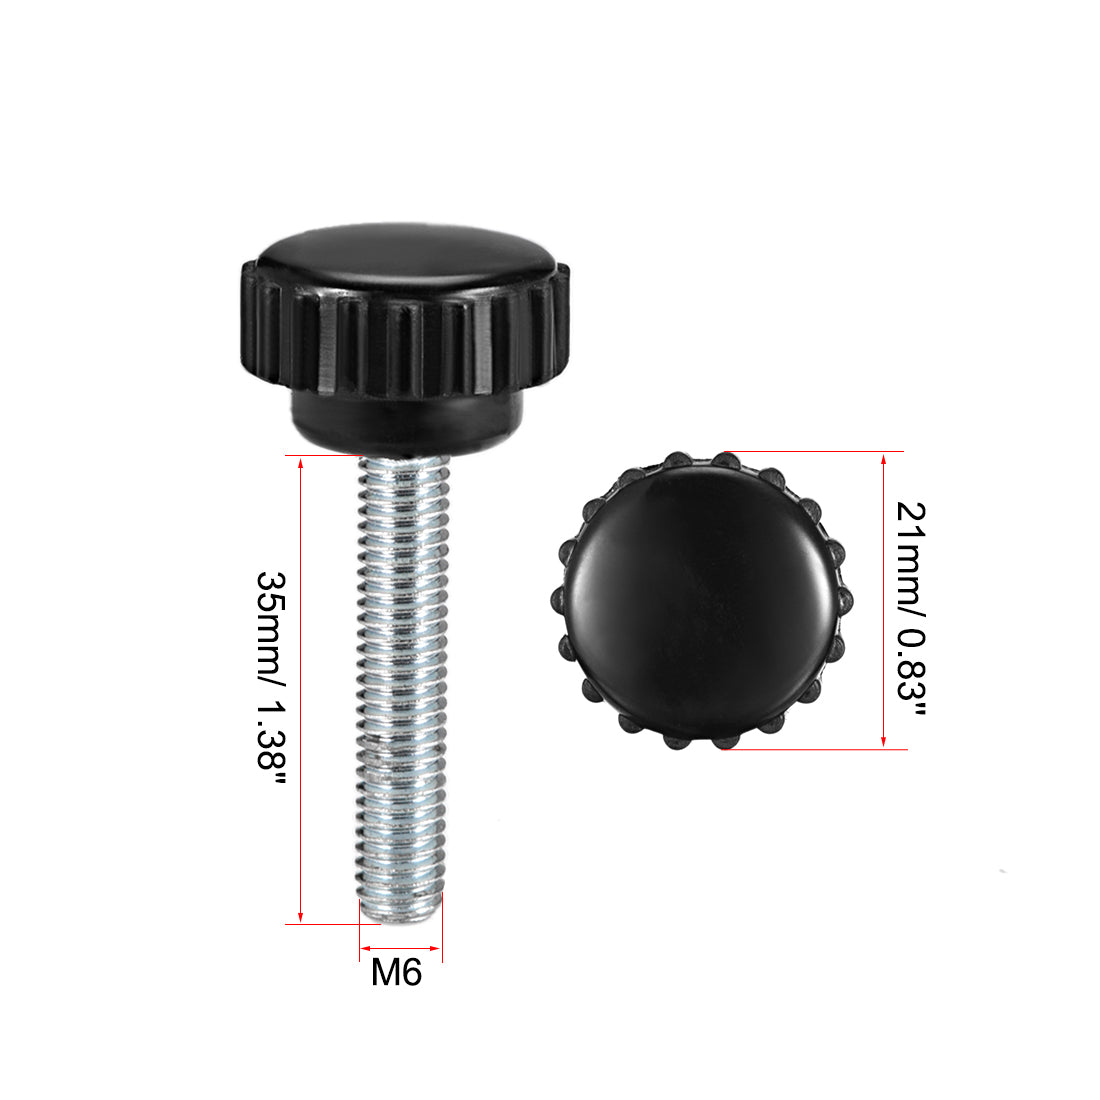 Uxcell Uxcell M4 x 35mm Male Thread Knurled Clamping Knobs Grip Thumb Screw on Type  5 Pcs